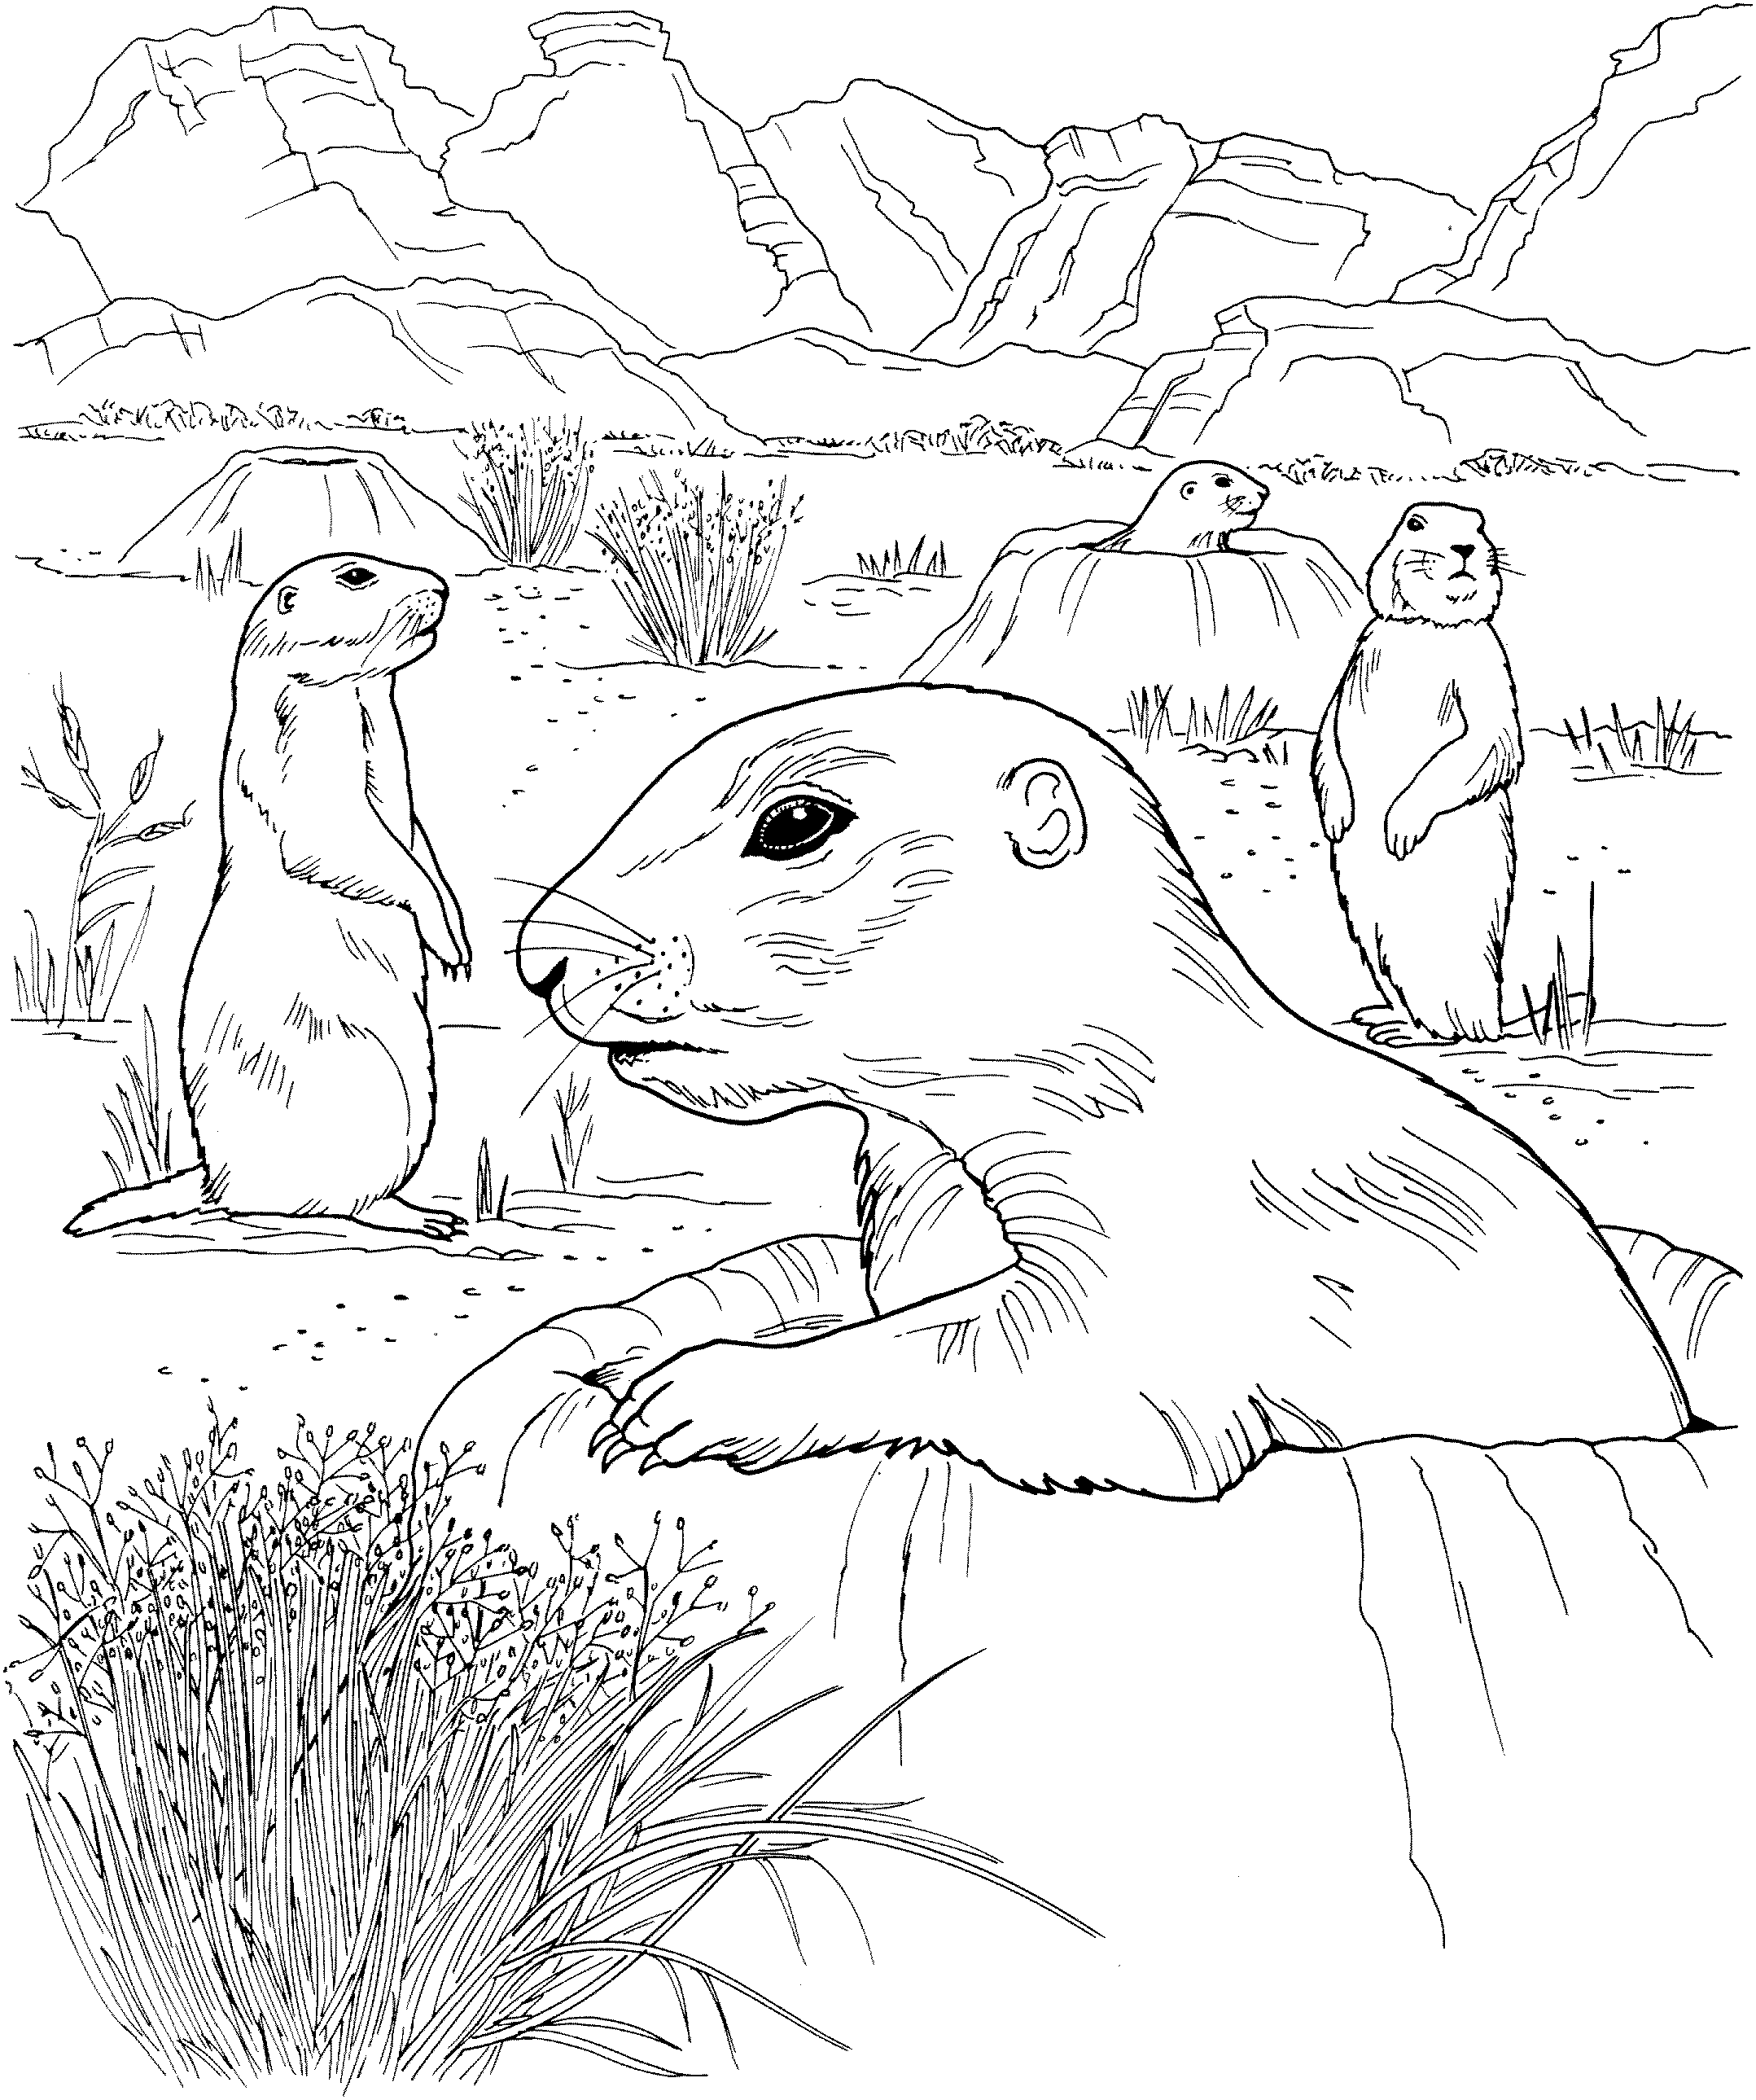 prairie dog pictures to print free prairie dog coloring page sheet book pictures print prairie to dog 